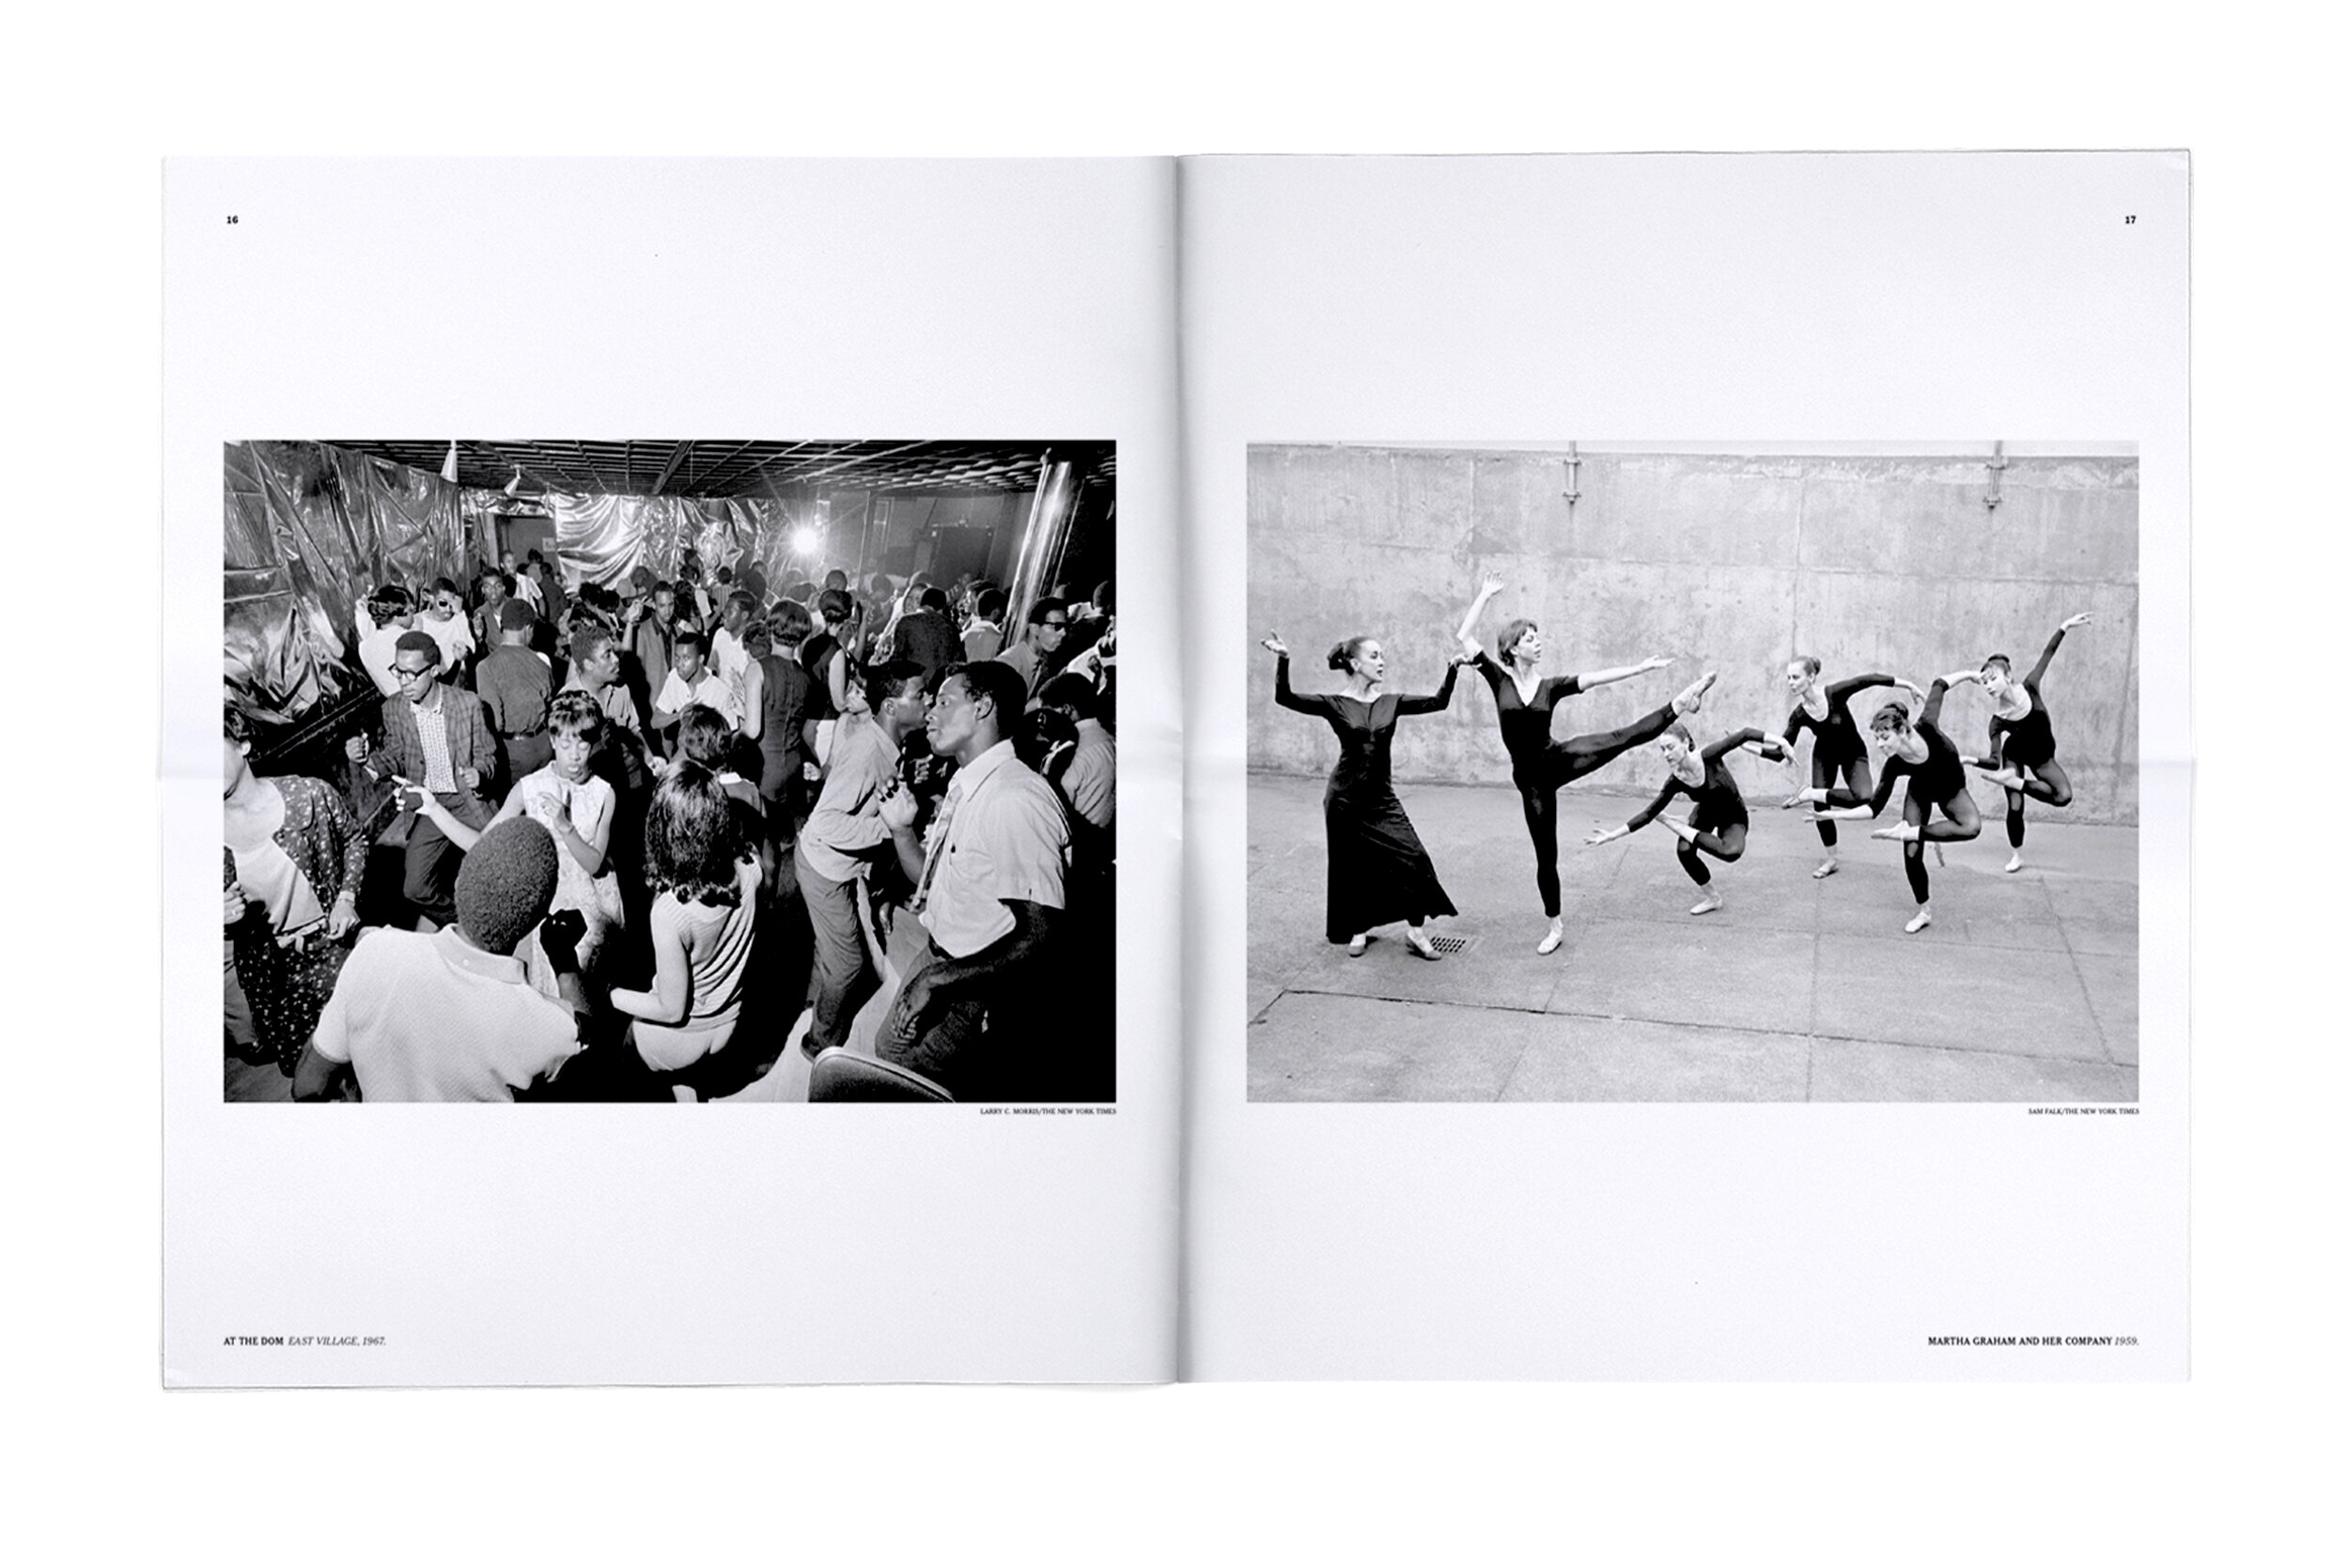   Dance from The New York Times archive . Photographs by Larry C. Morris and Sam Falk. 